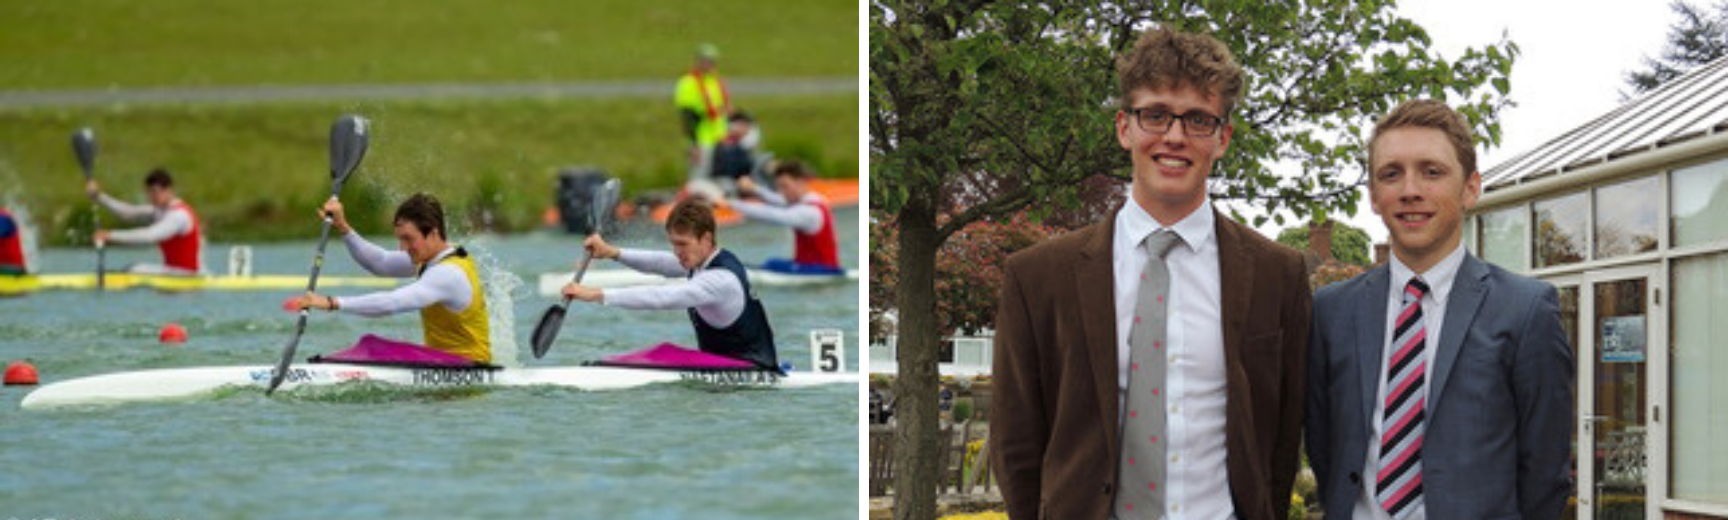 A picture of Magnus canoeing and a picture of Magnus dressed in a suit, in a garden with another person